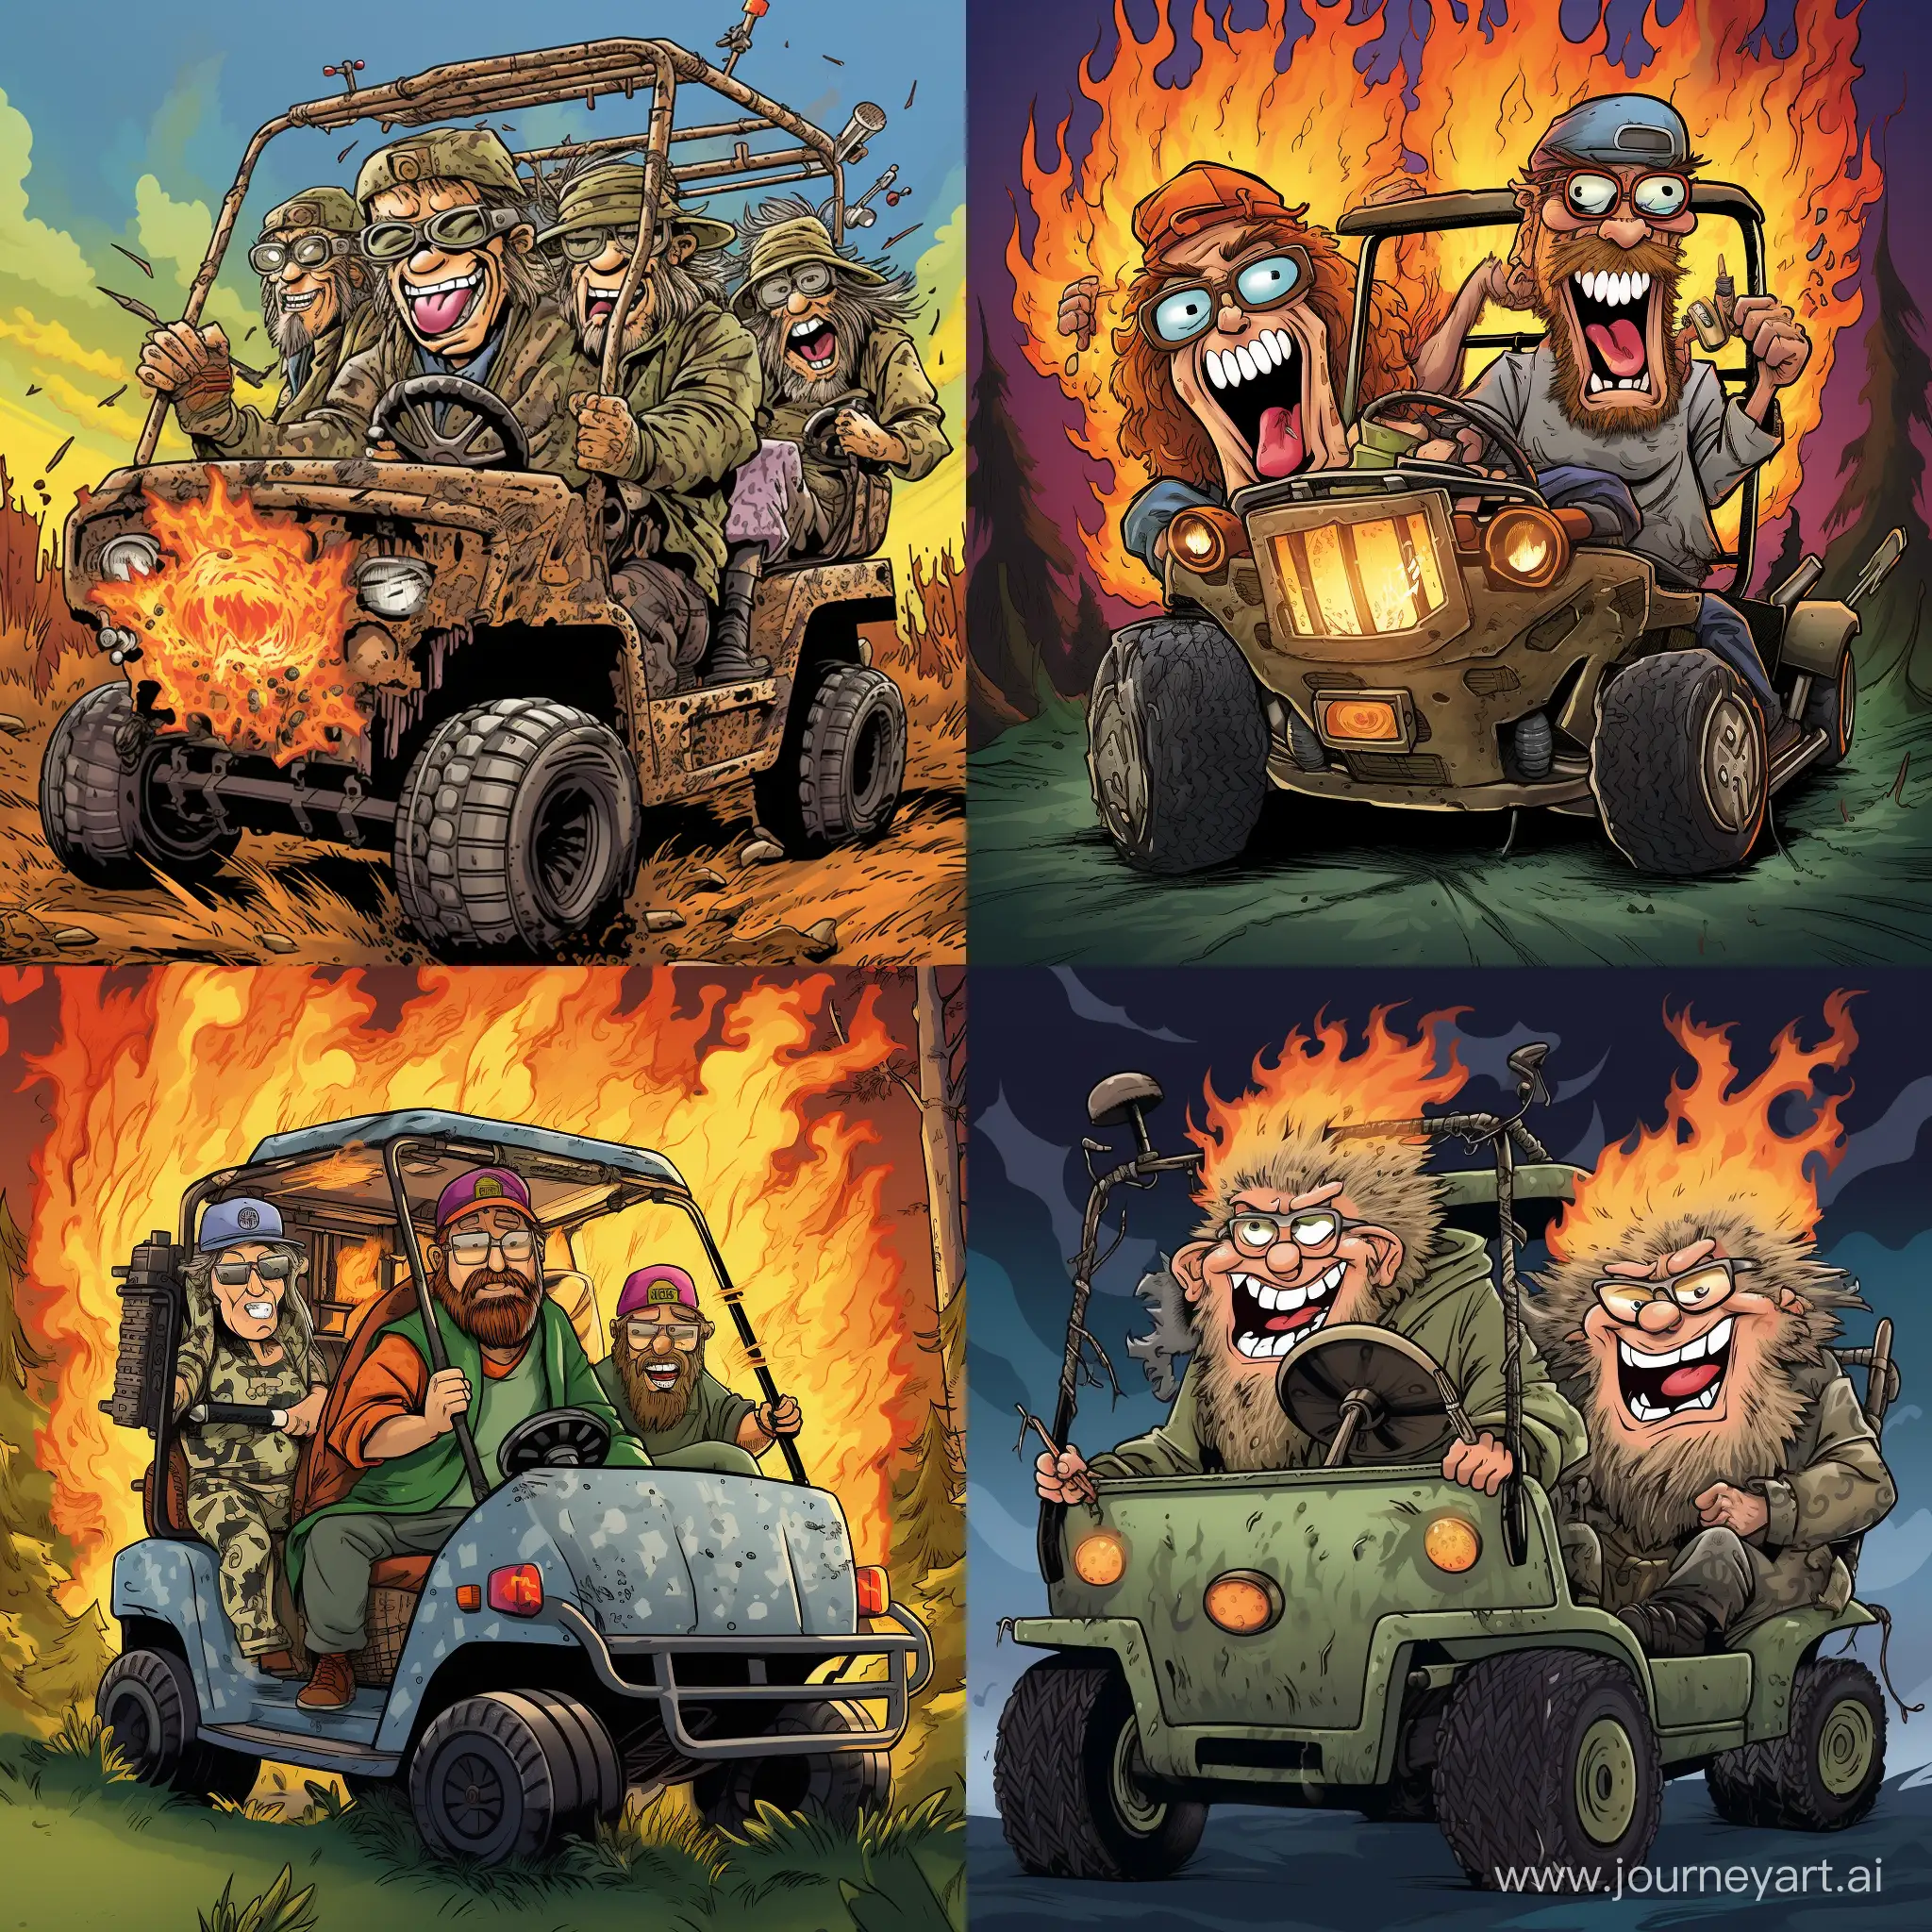 Comical, oversized, rady for fun faced hunters are going to the woods to hunt. They are outfitted in Hunting gear. They are riding in a camouflaged golf cart. Golfcart is an Extreme, custom, design.The golf cart has monstrous tires. The road is engulfed in fire. The image is humorous and oversized. The camera is in front
